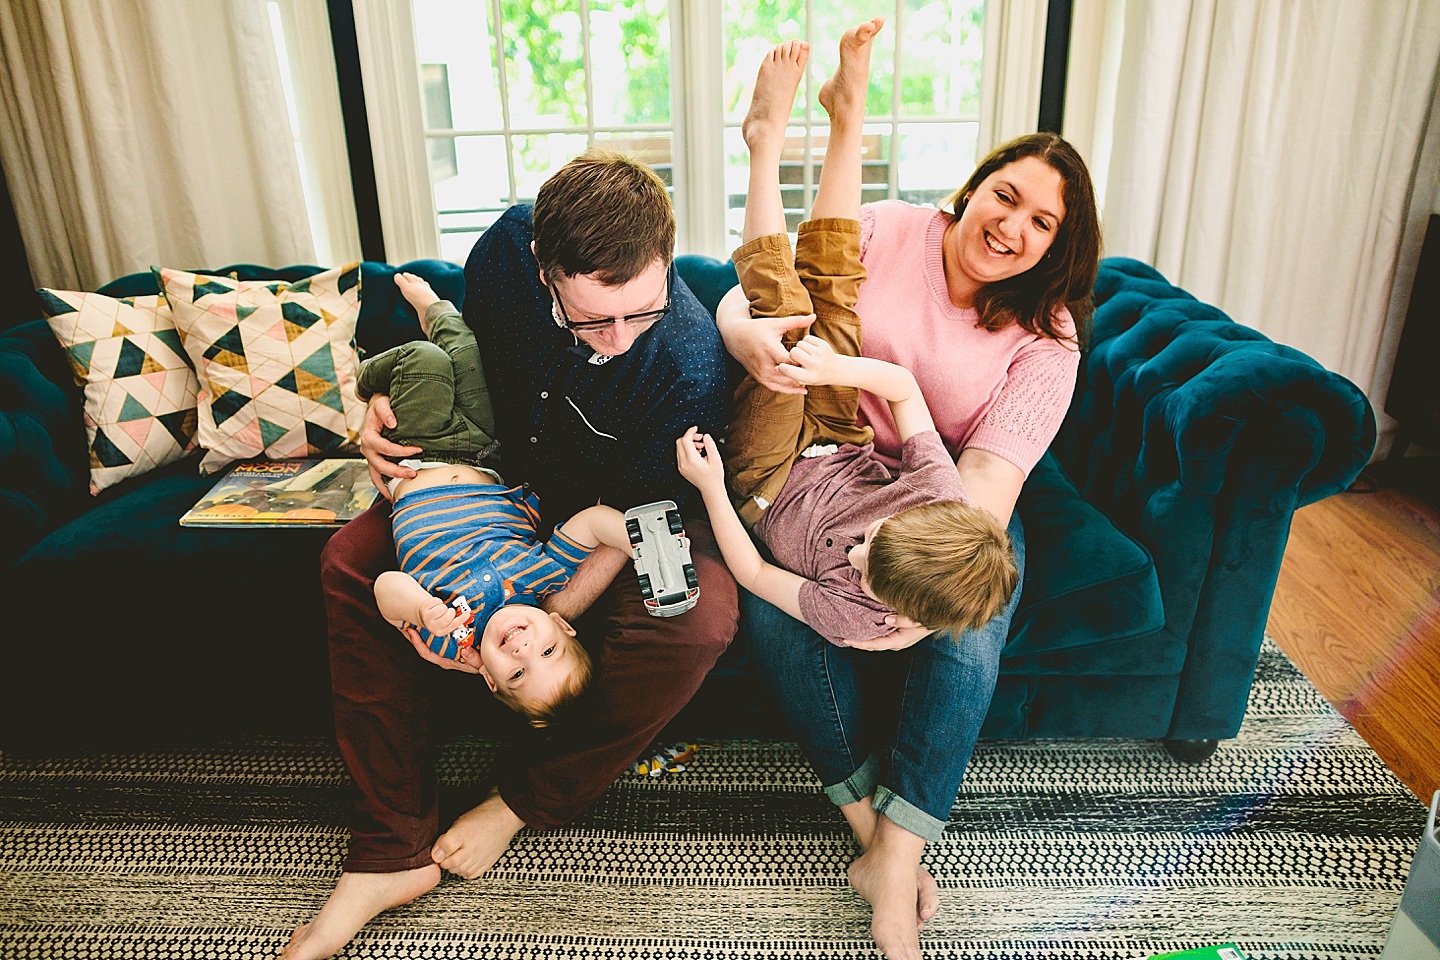 Parents goofing around with kids on couch